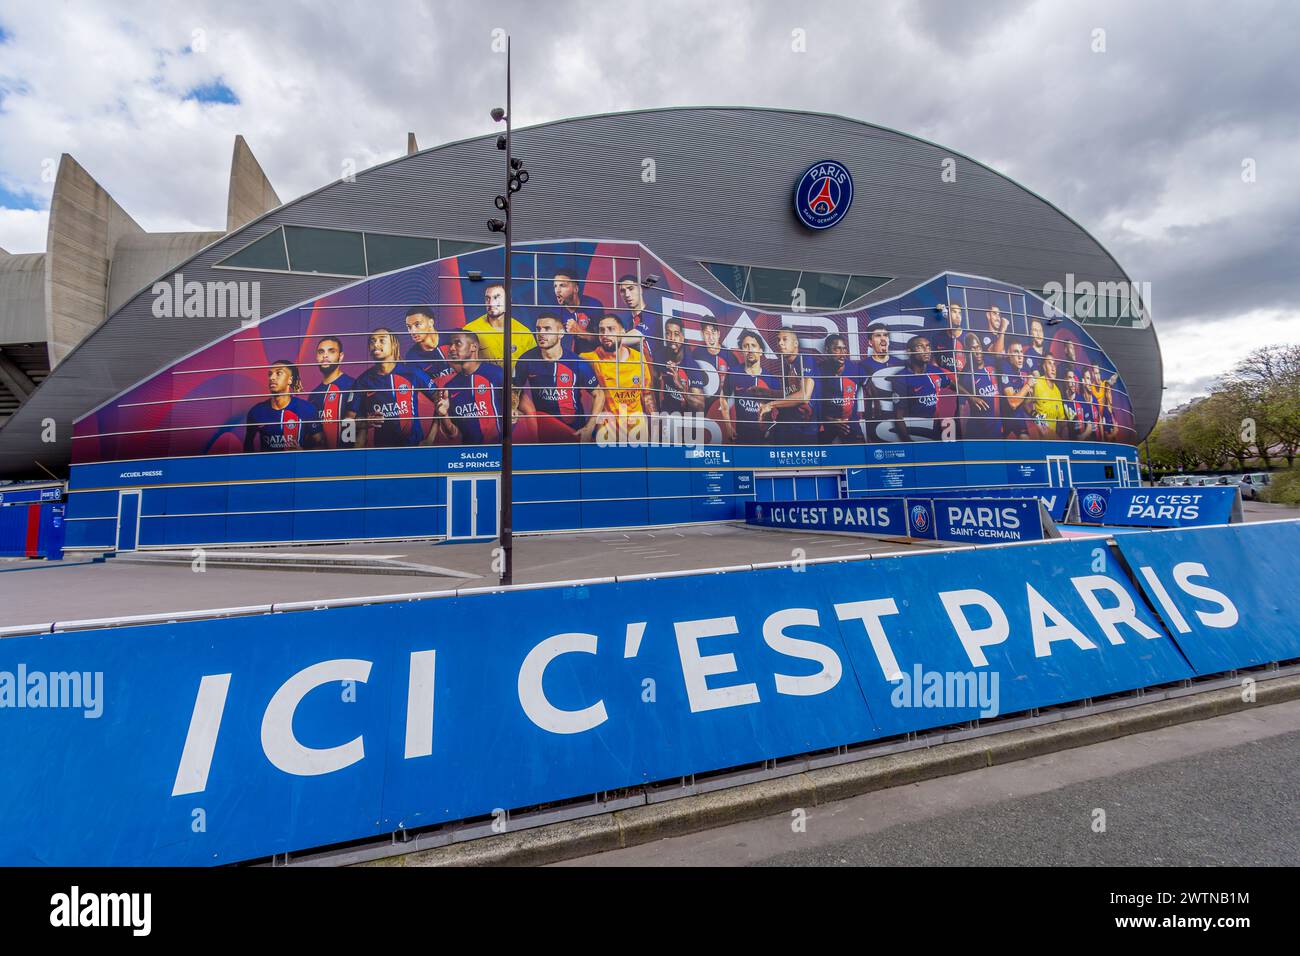 Main entrance to the Parc des Princes, French stadium hosting the Paris Saint-Germain (PSG) football club and Olympic venue Stock Photo